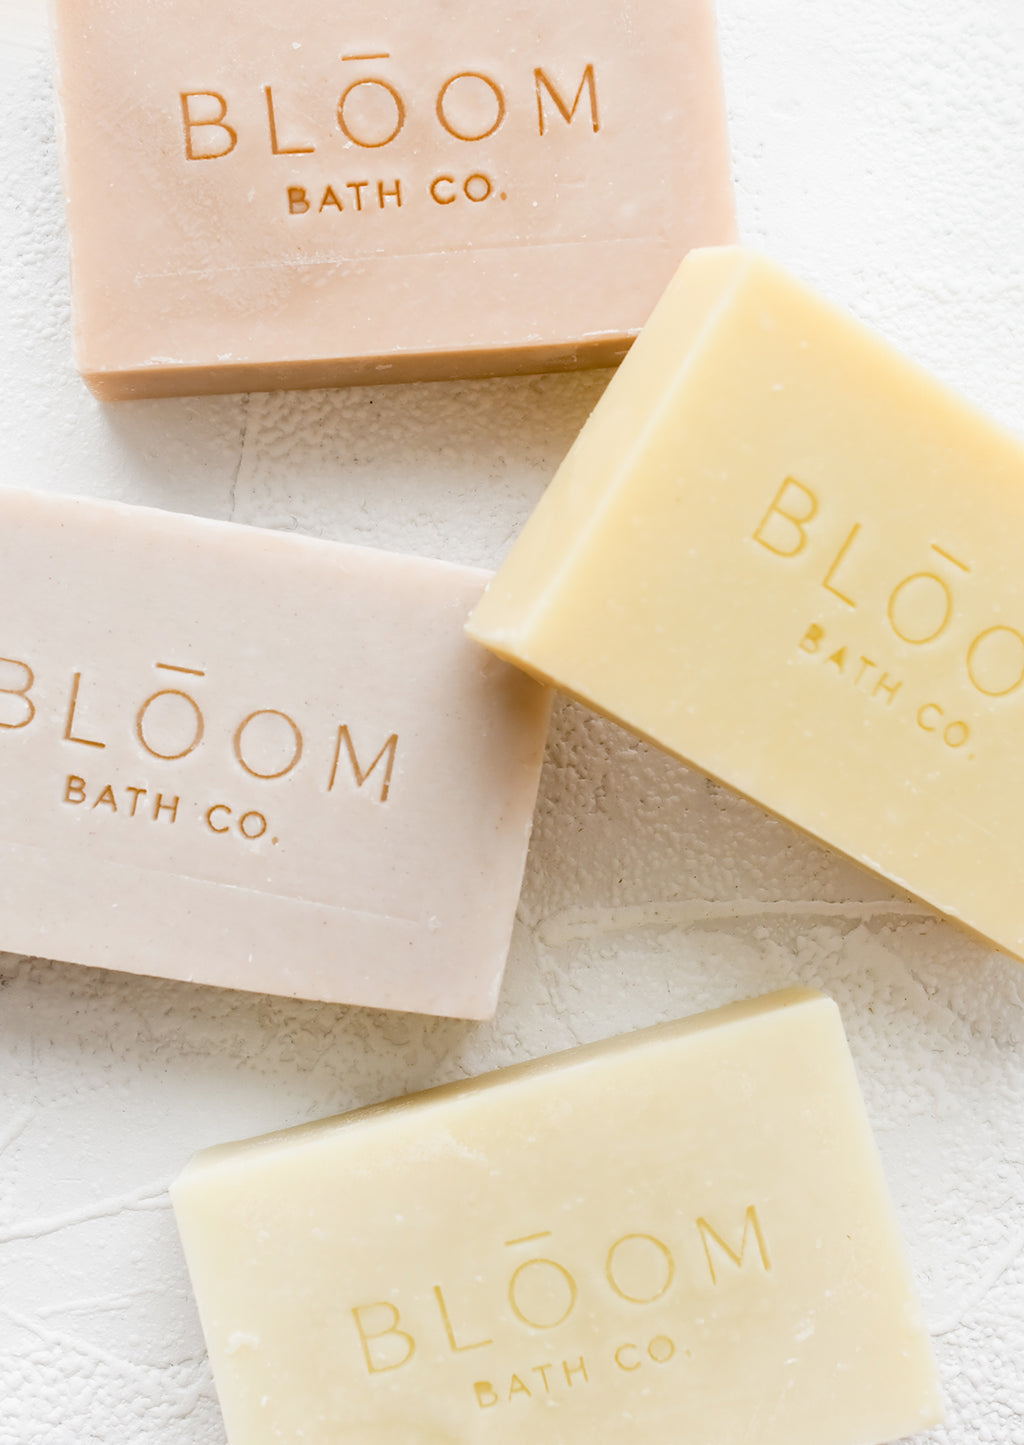 1: Four rectangular bars of soap in pastel colors with logo imprint.